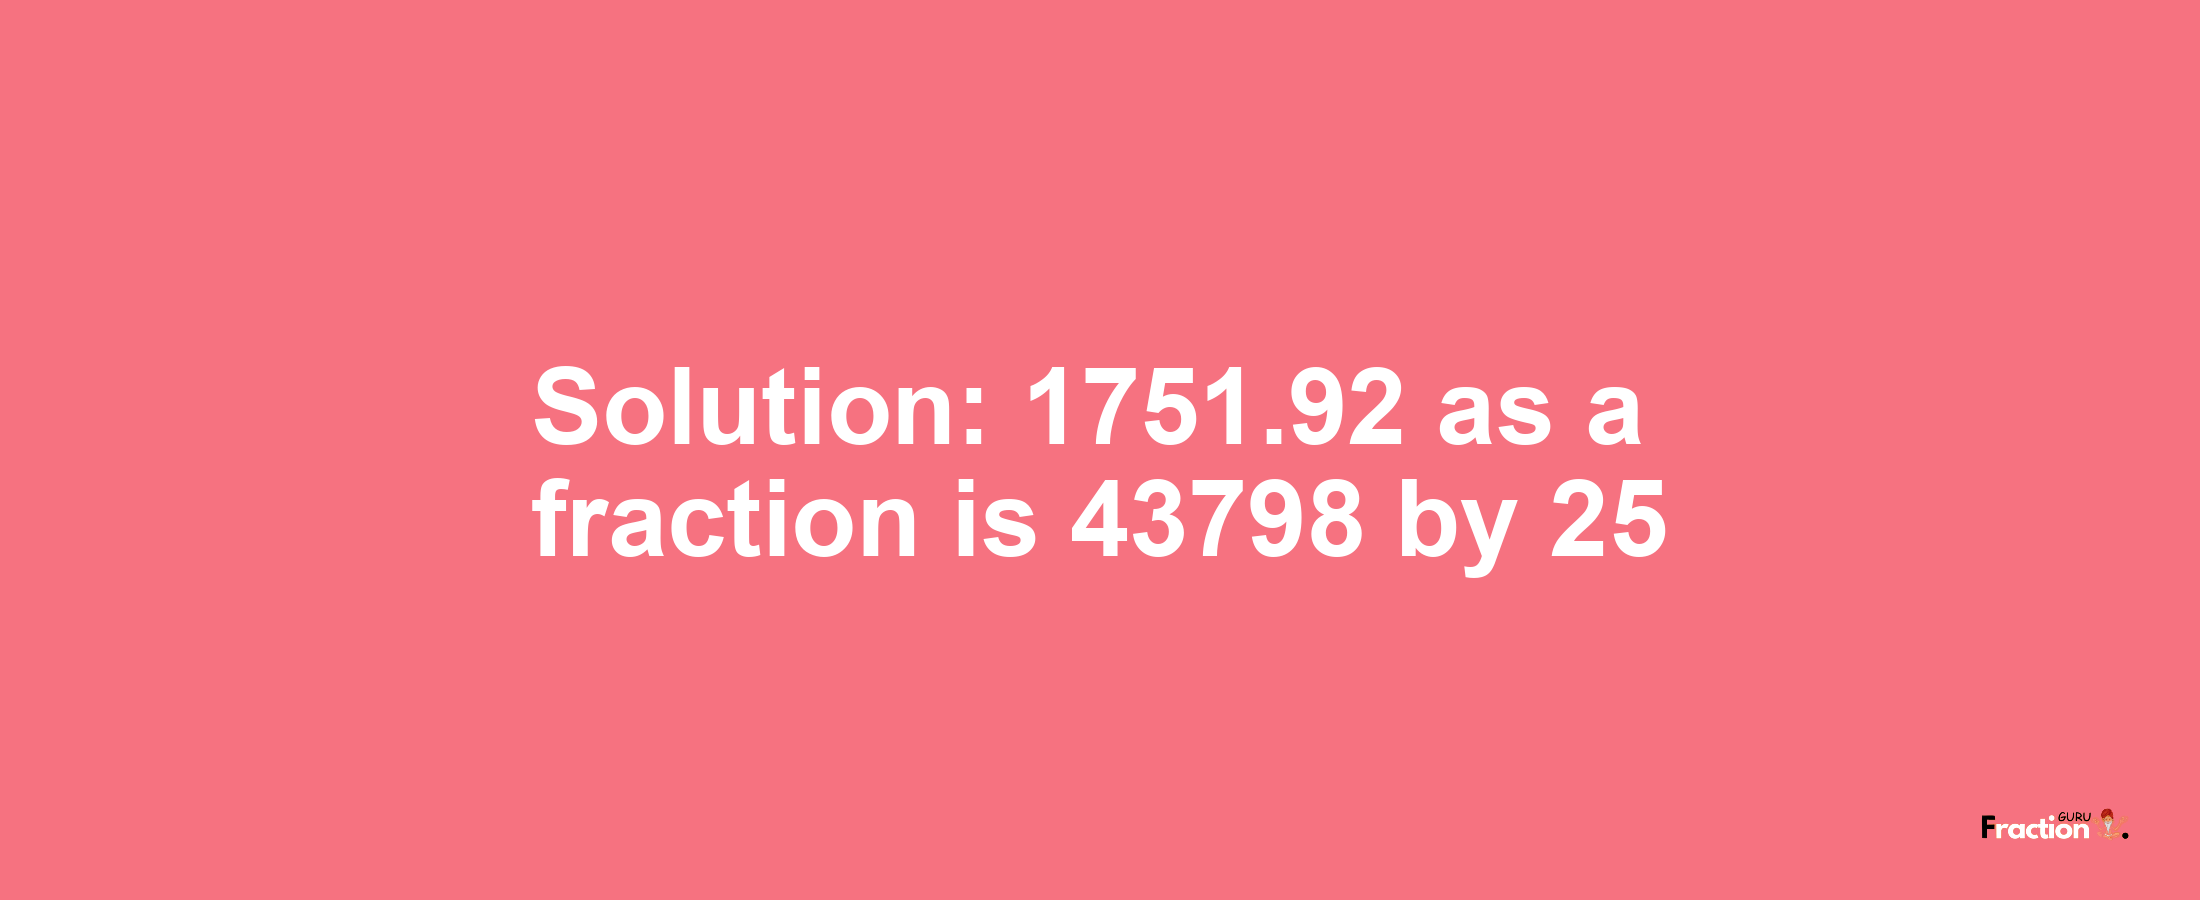 Solution:1751.92 as a fraction is 43798/25